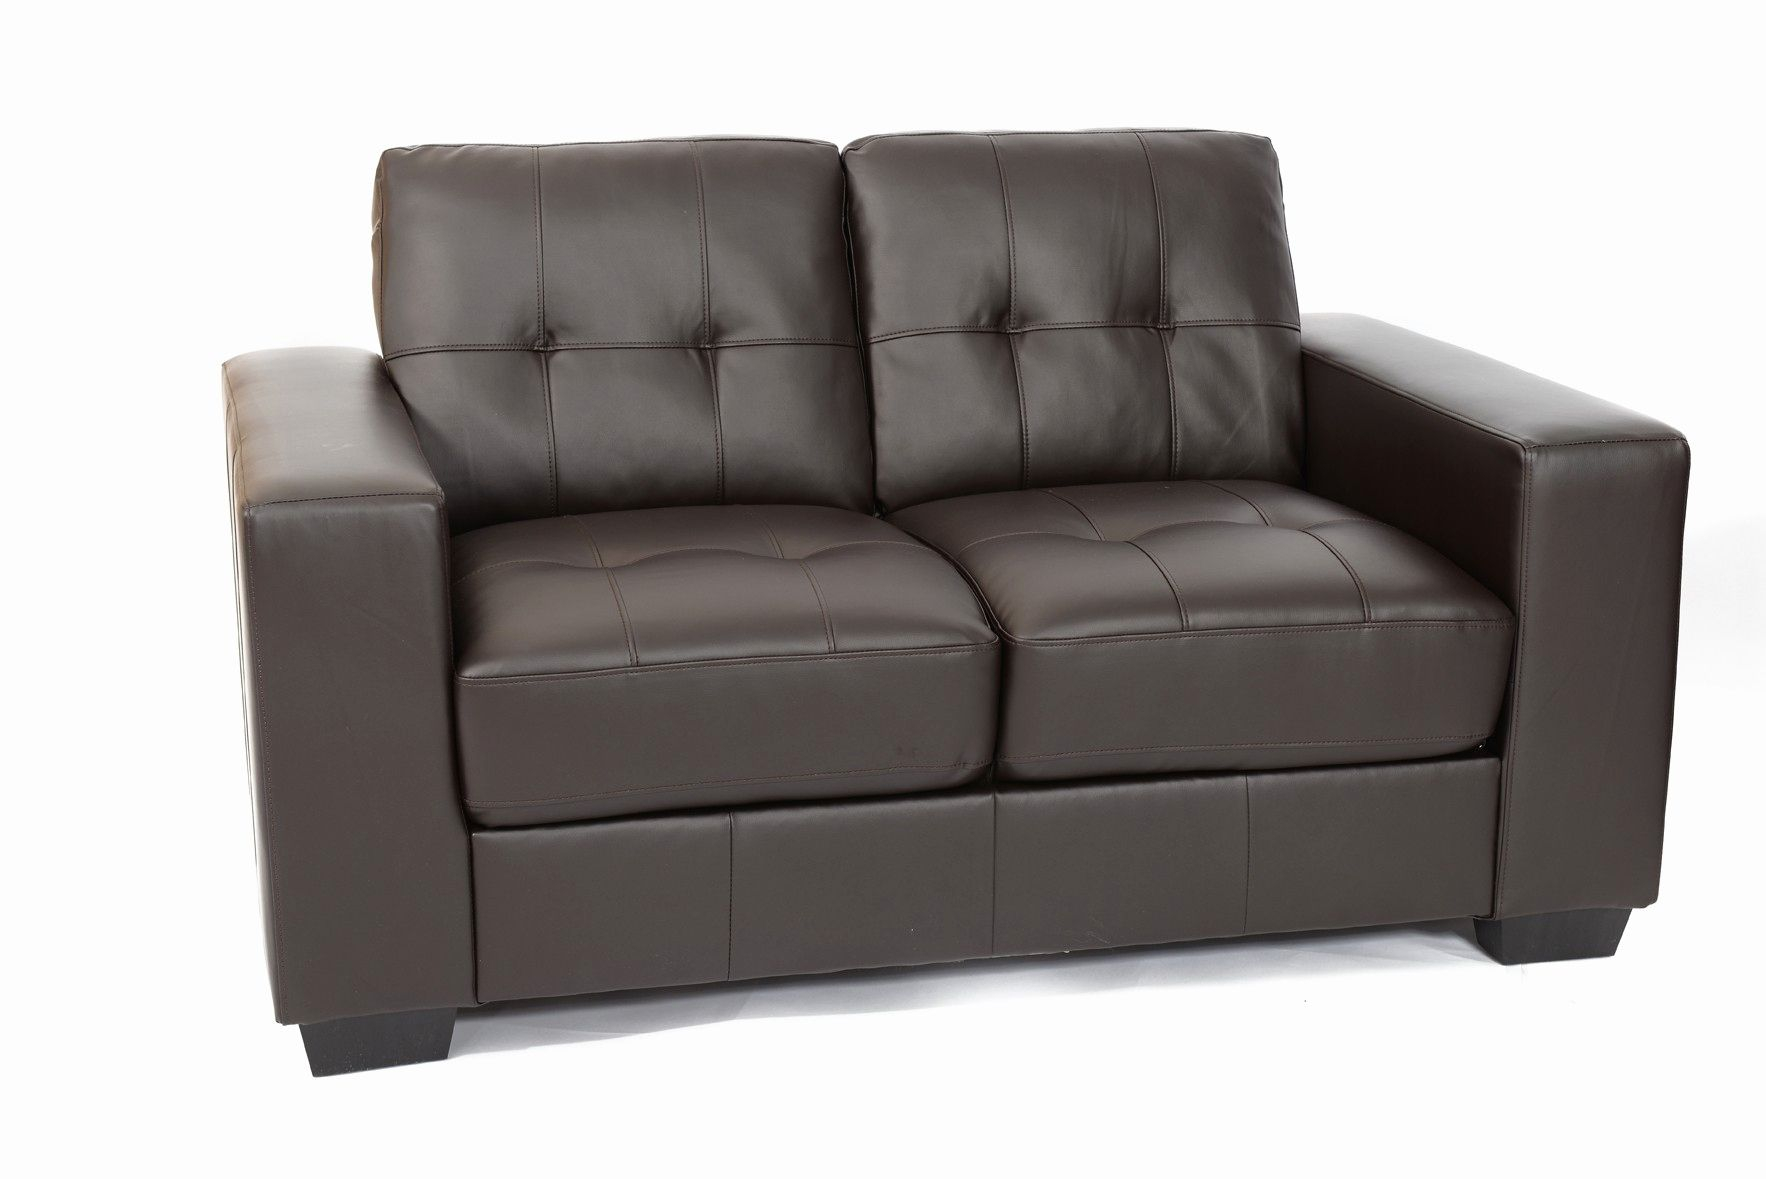 naples leather sofa review